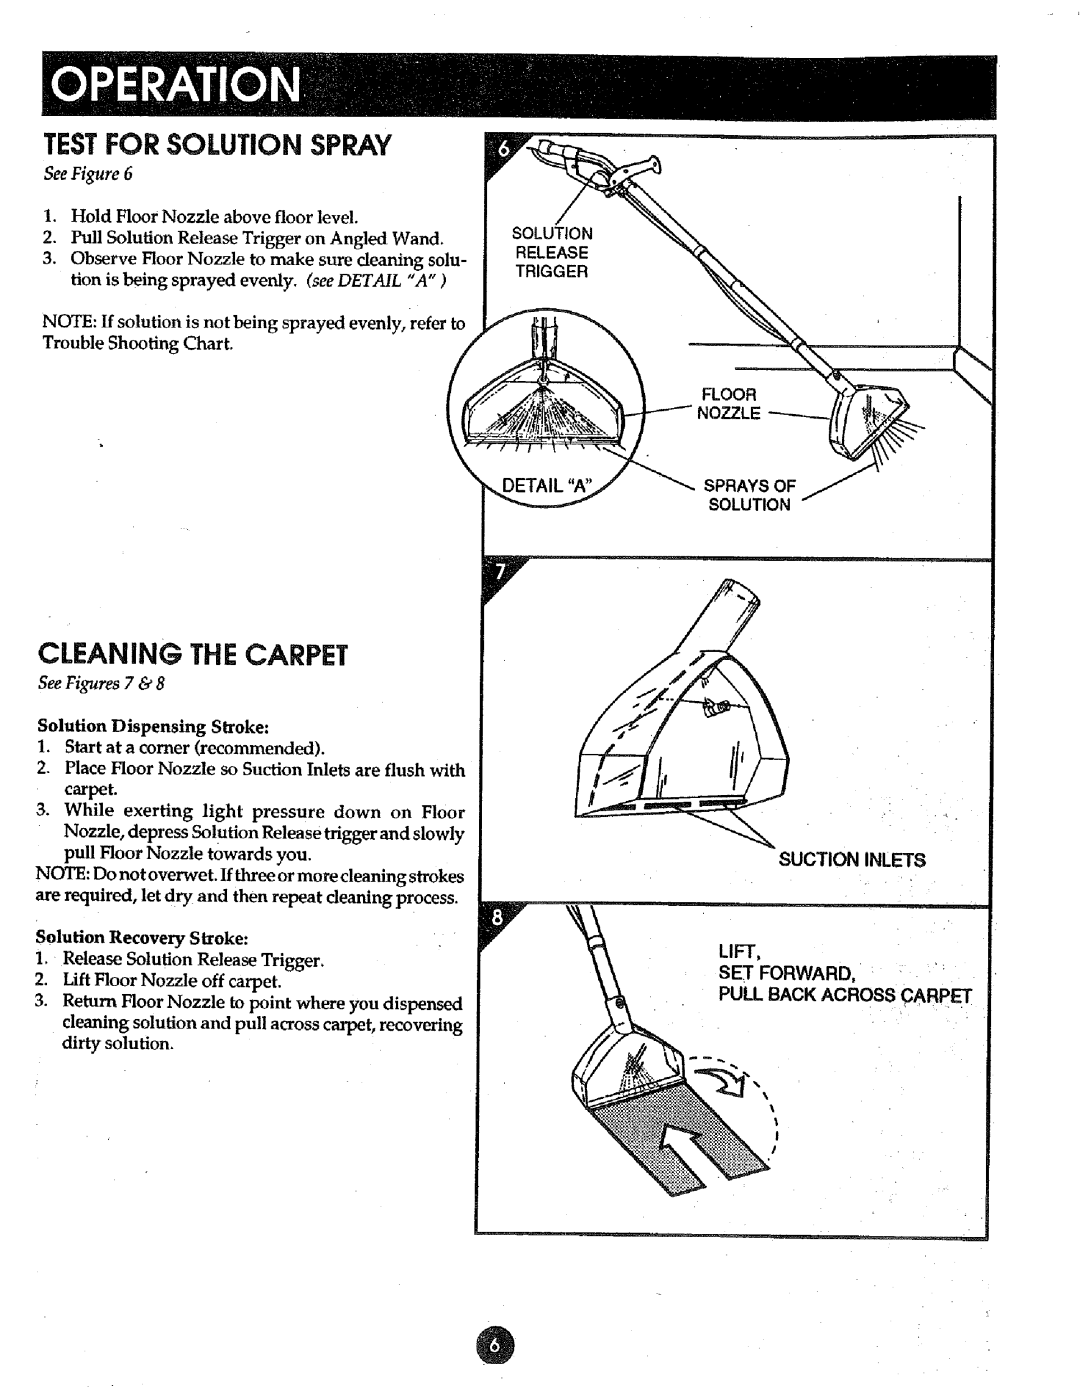 Sears 175, 8690290 Testfor Solution Spray, Cleaning The Carpet, See Figures 7, Lift Set Forward Pull Back Across Carpet 